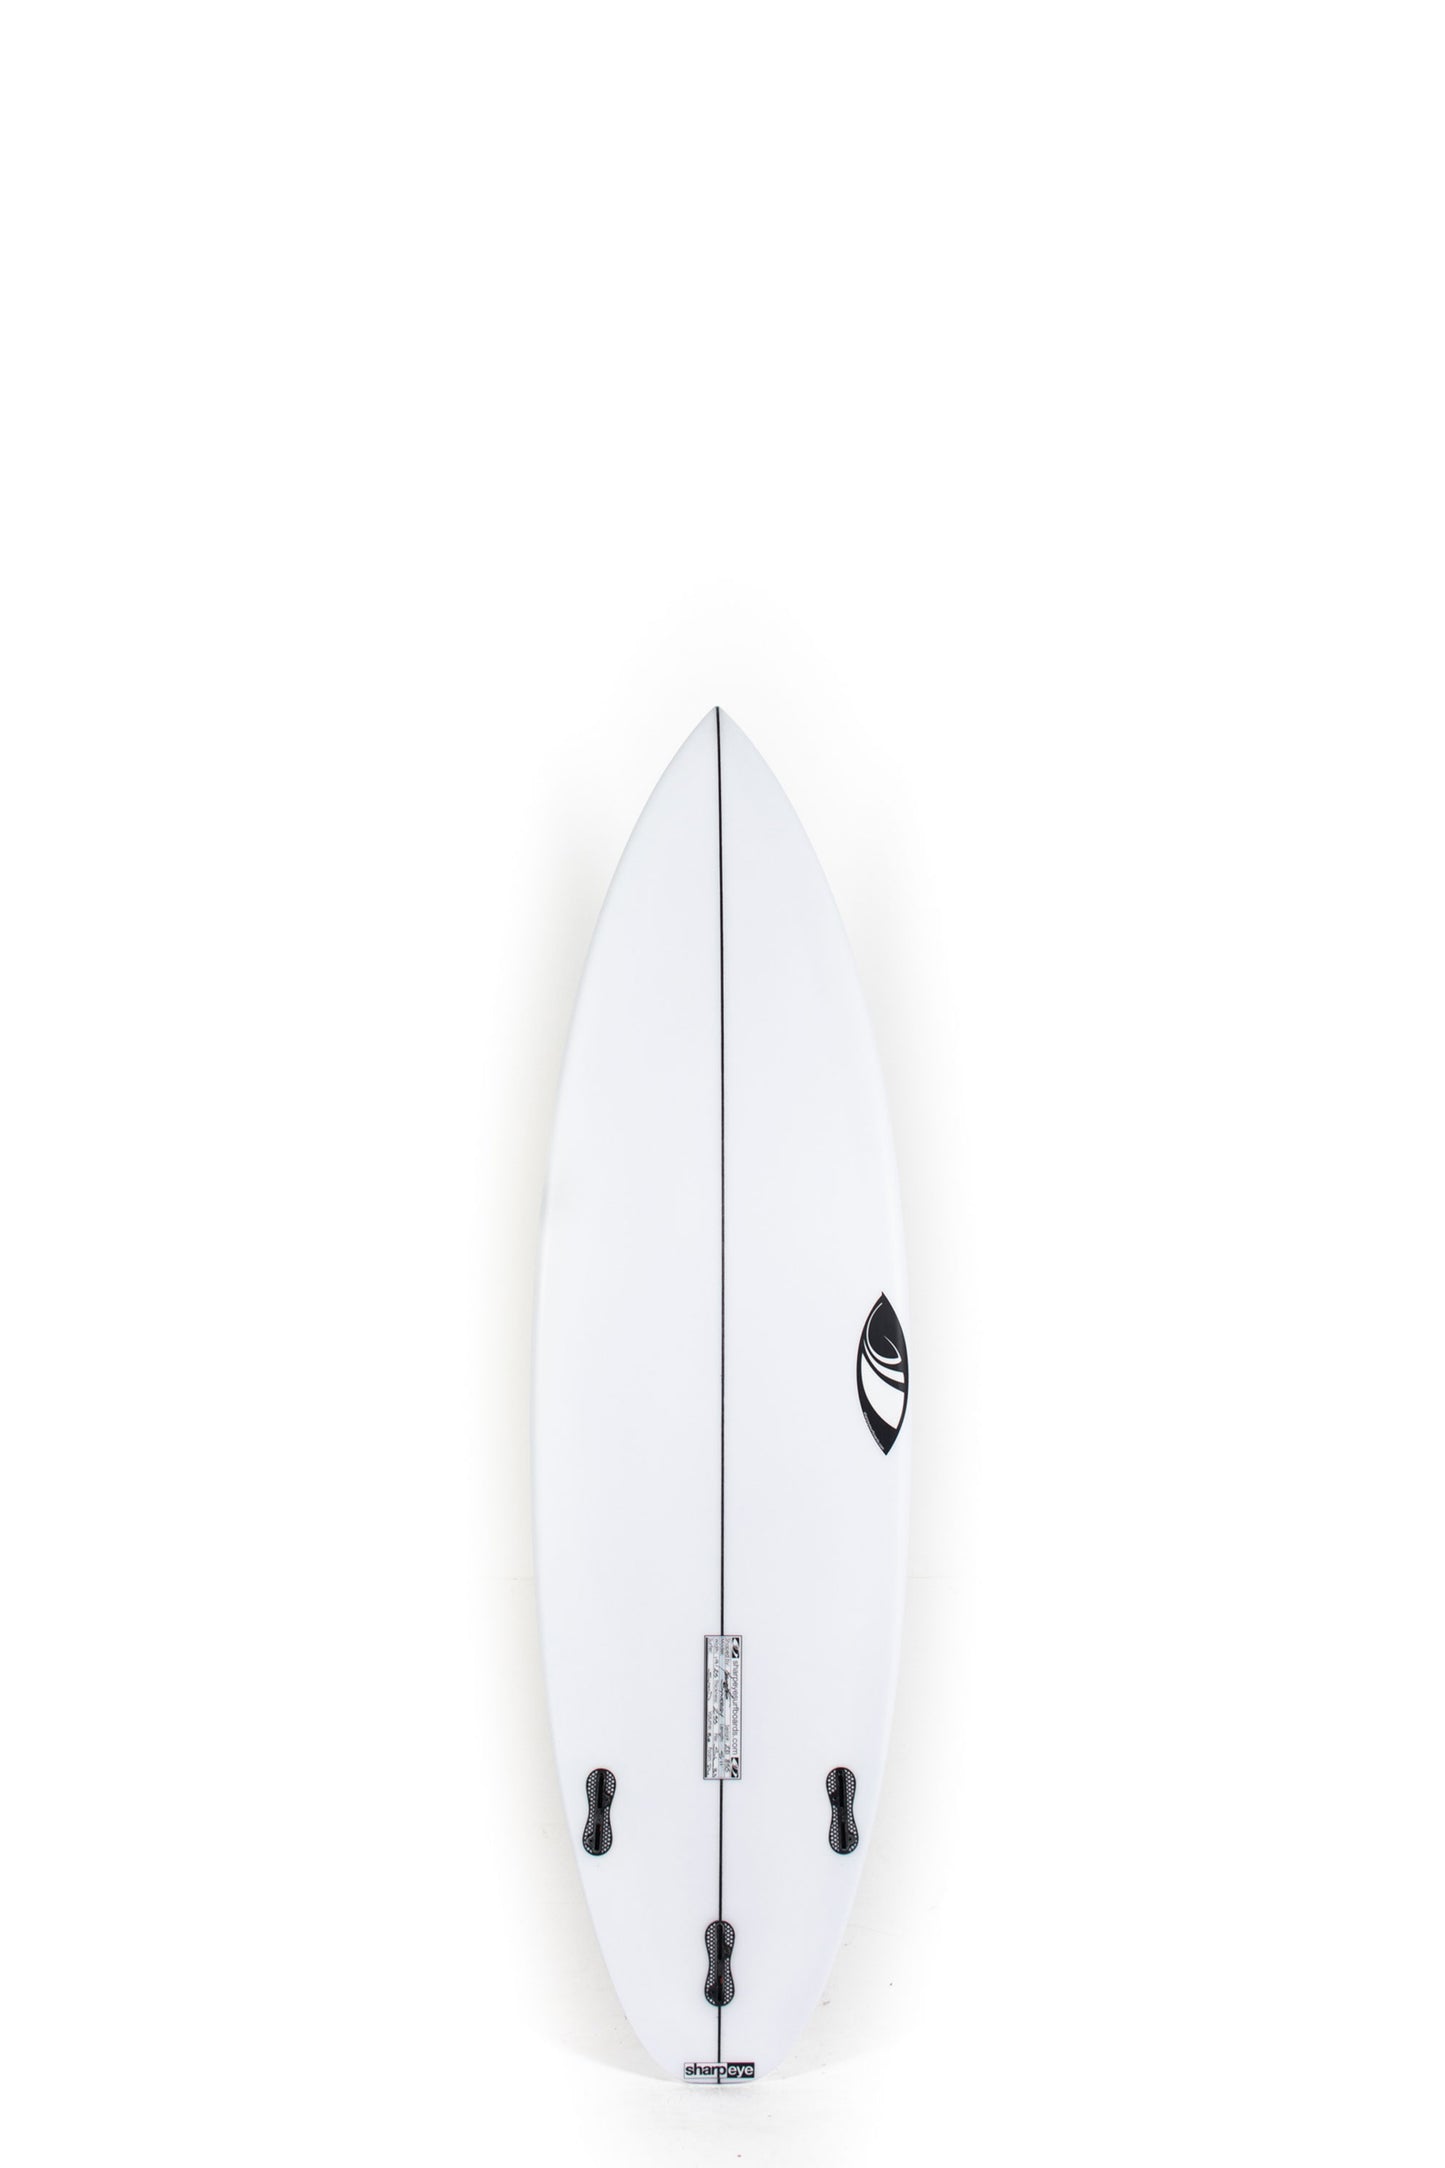 Sharp Eye Surfboards - Synergy by Marcio Zouvi | Shop at PUKAS